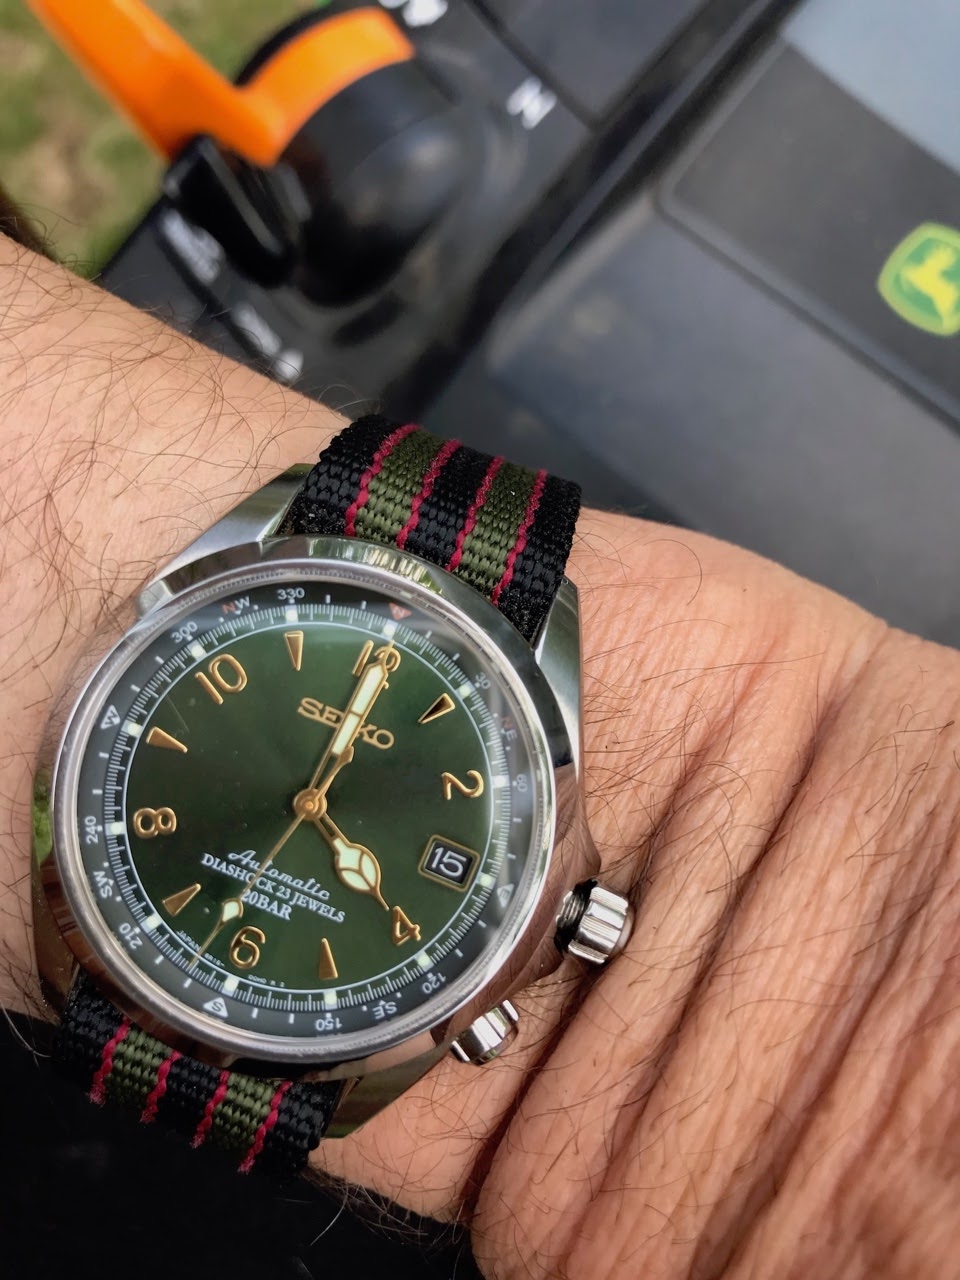 Seiko - A Gentleman's Alpinist? (A brief history and comprehensive review  of Seiko's new US release.)